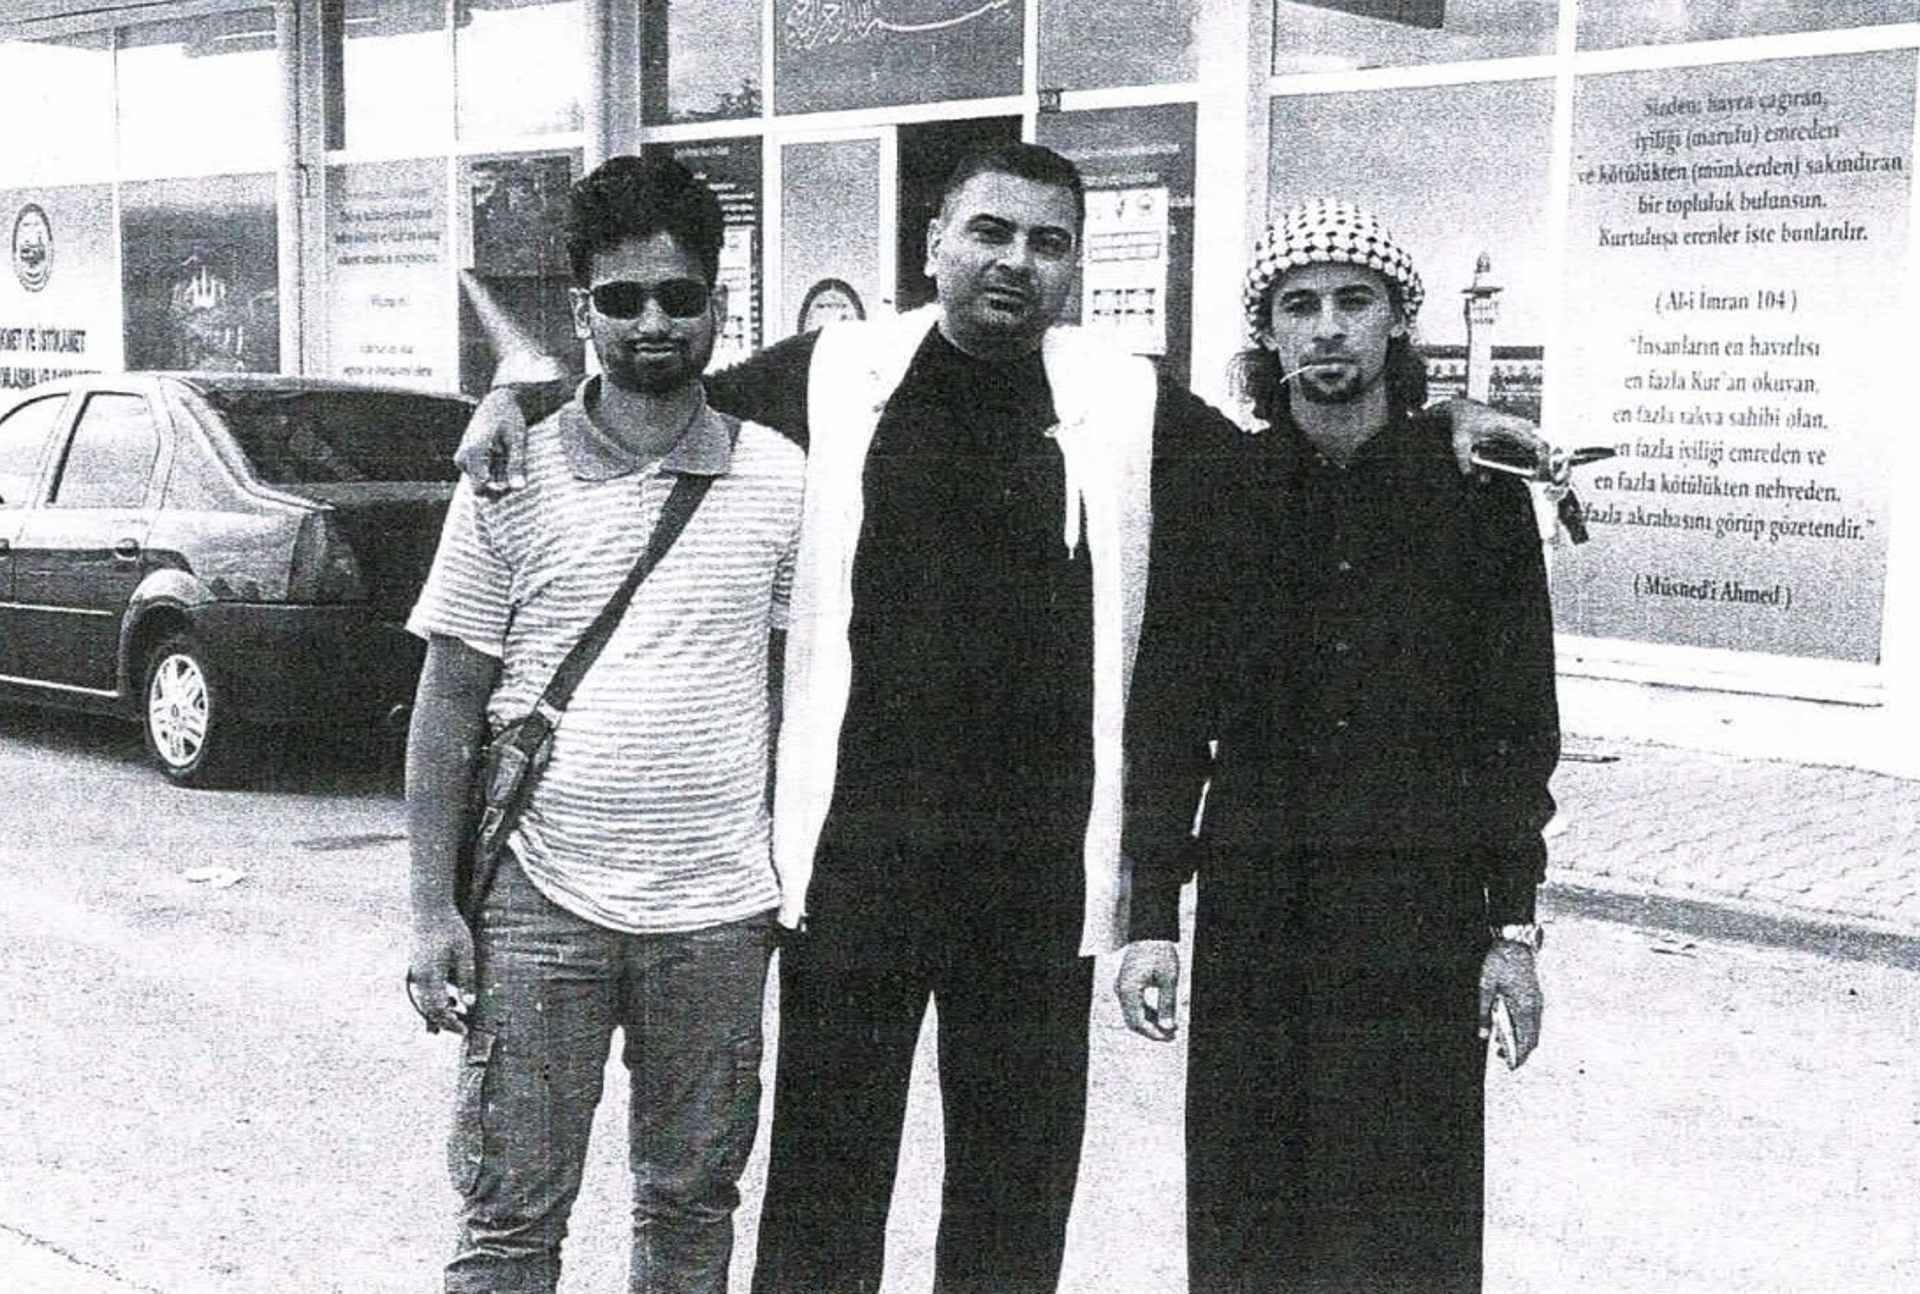 Faridi (C), with Alagha (R) and another man in Konya, in a copy of a photo from Alagha's phone (MEE)